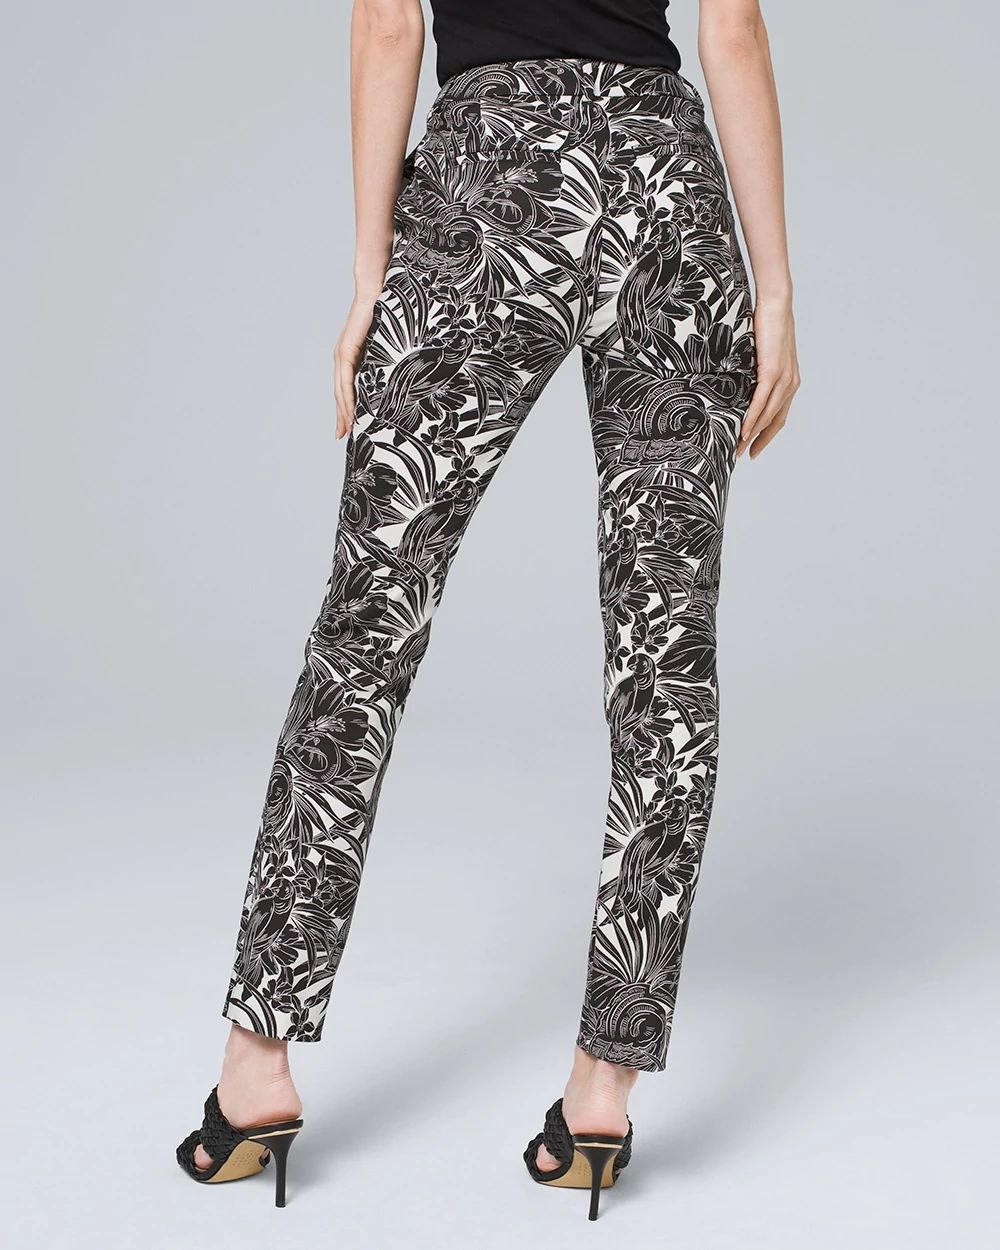 Tropical-Print Comfort Stretch Slim Ankle Pants click to view larger image.